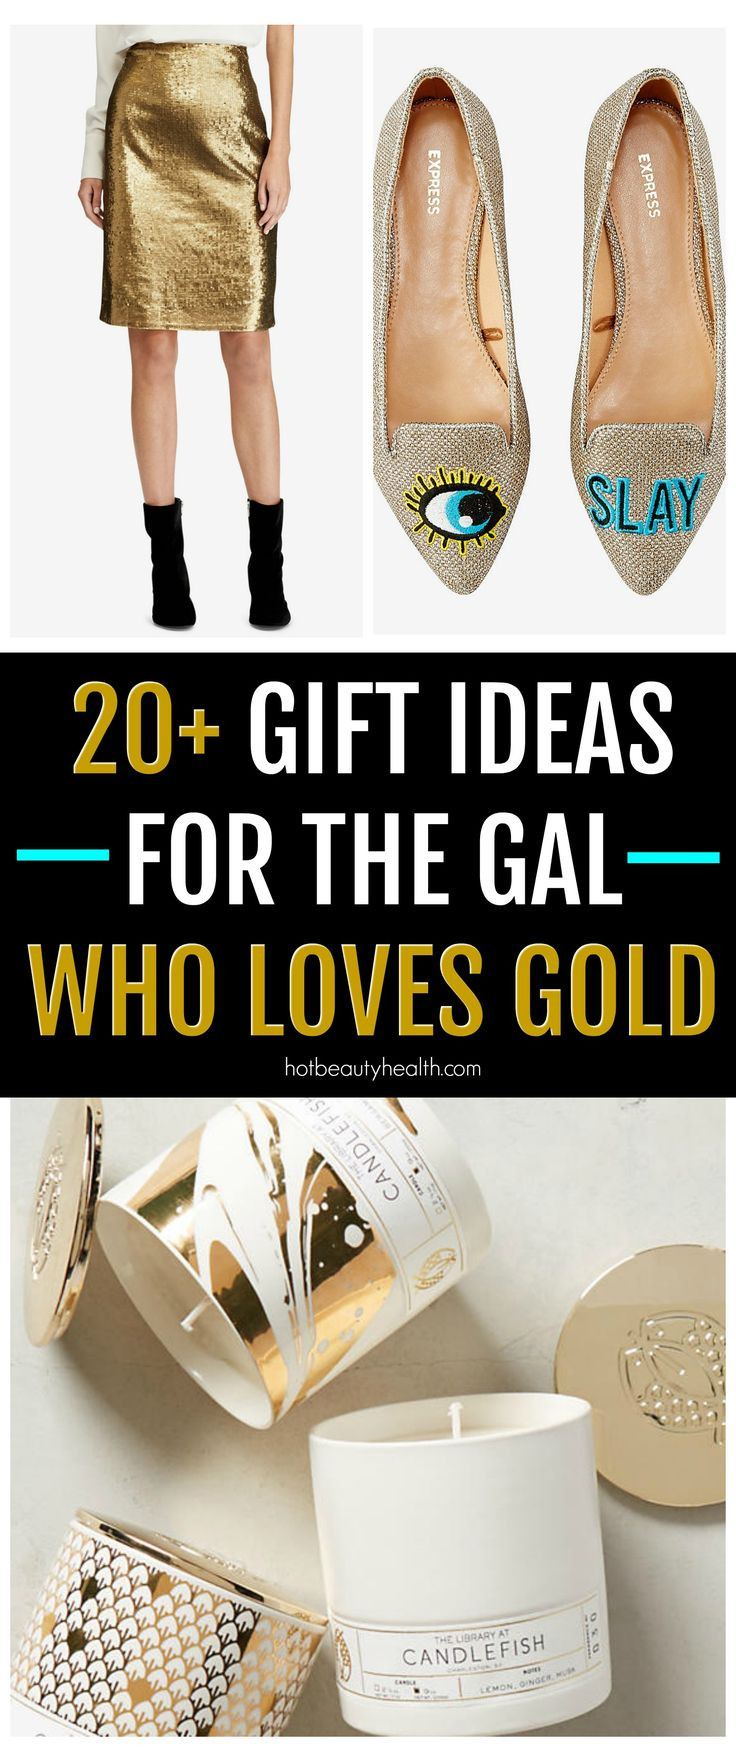 Wife Christmas Gift Ideas
 25 unique Gifts for wife ideas on Pinterest